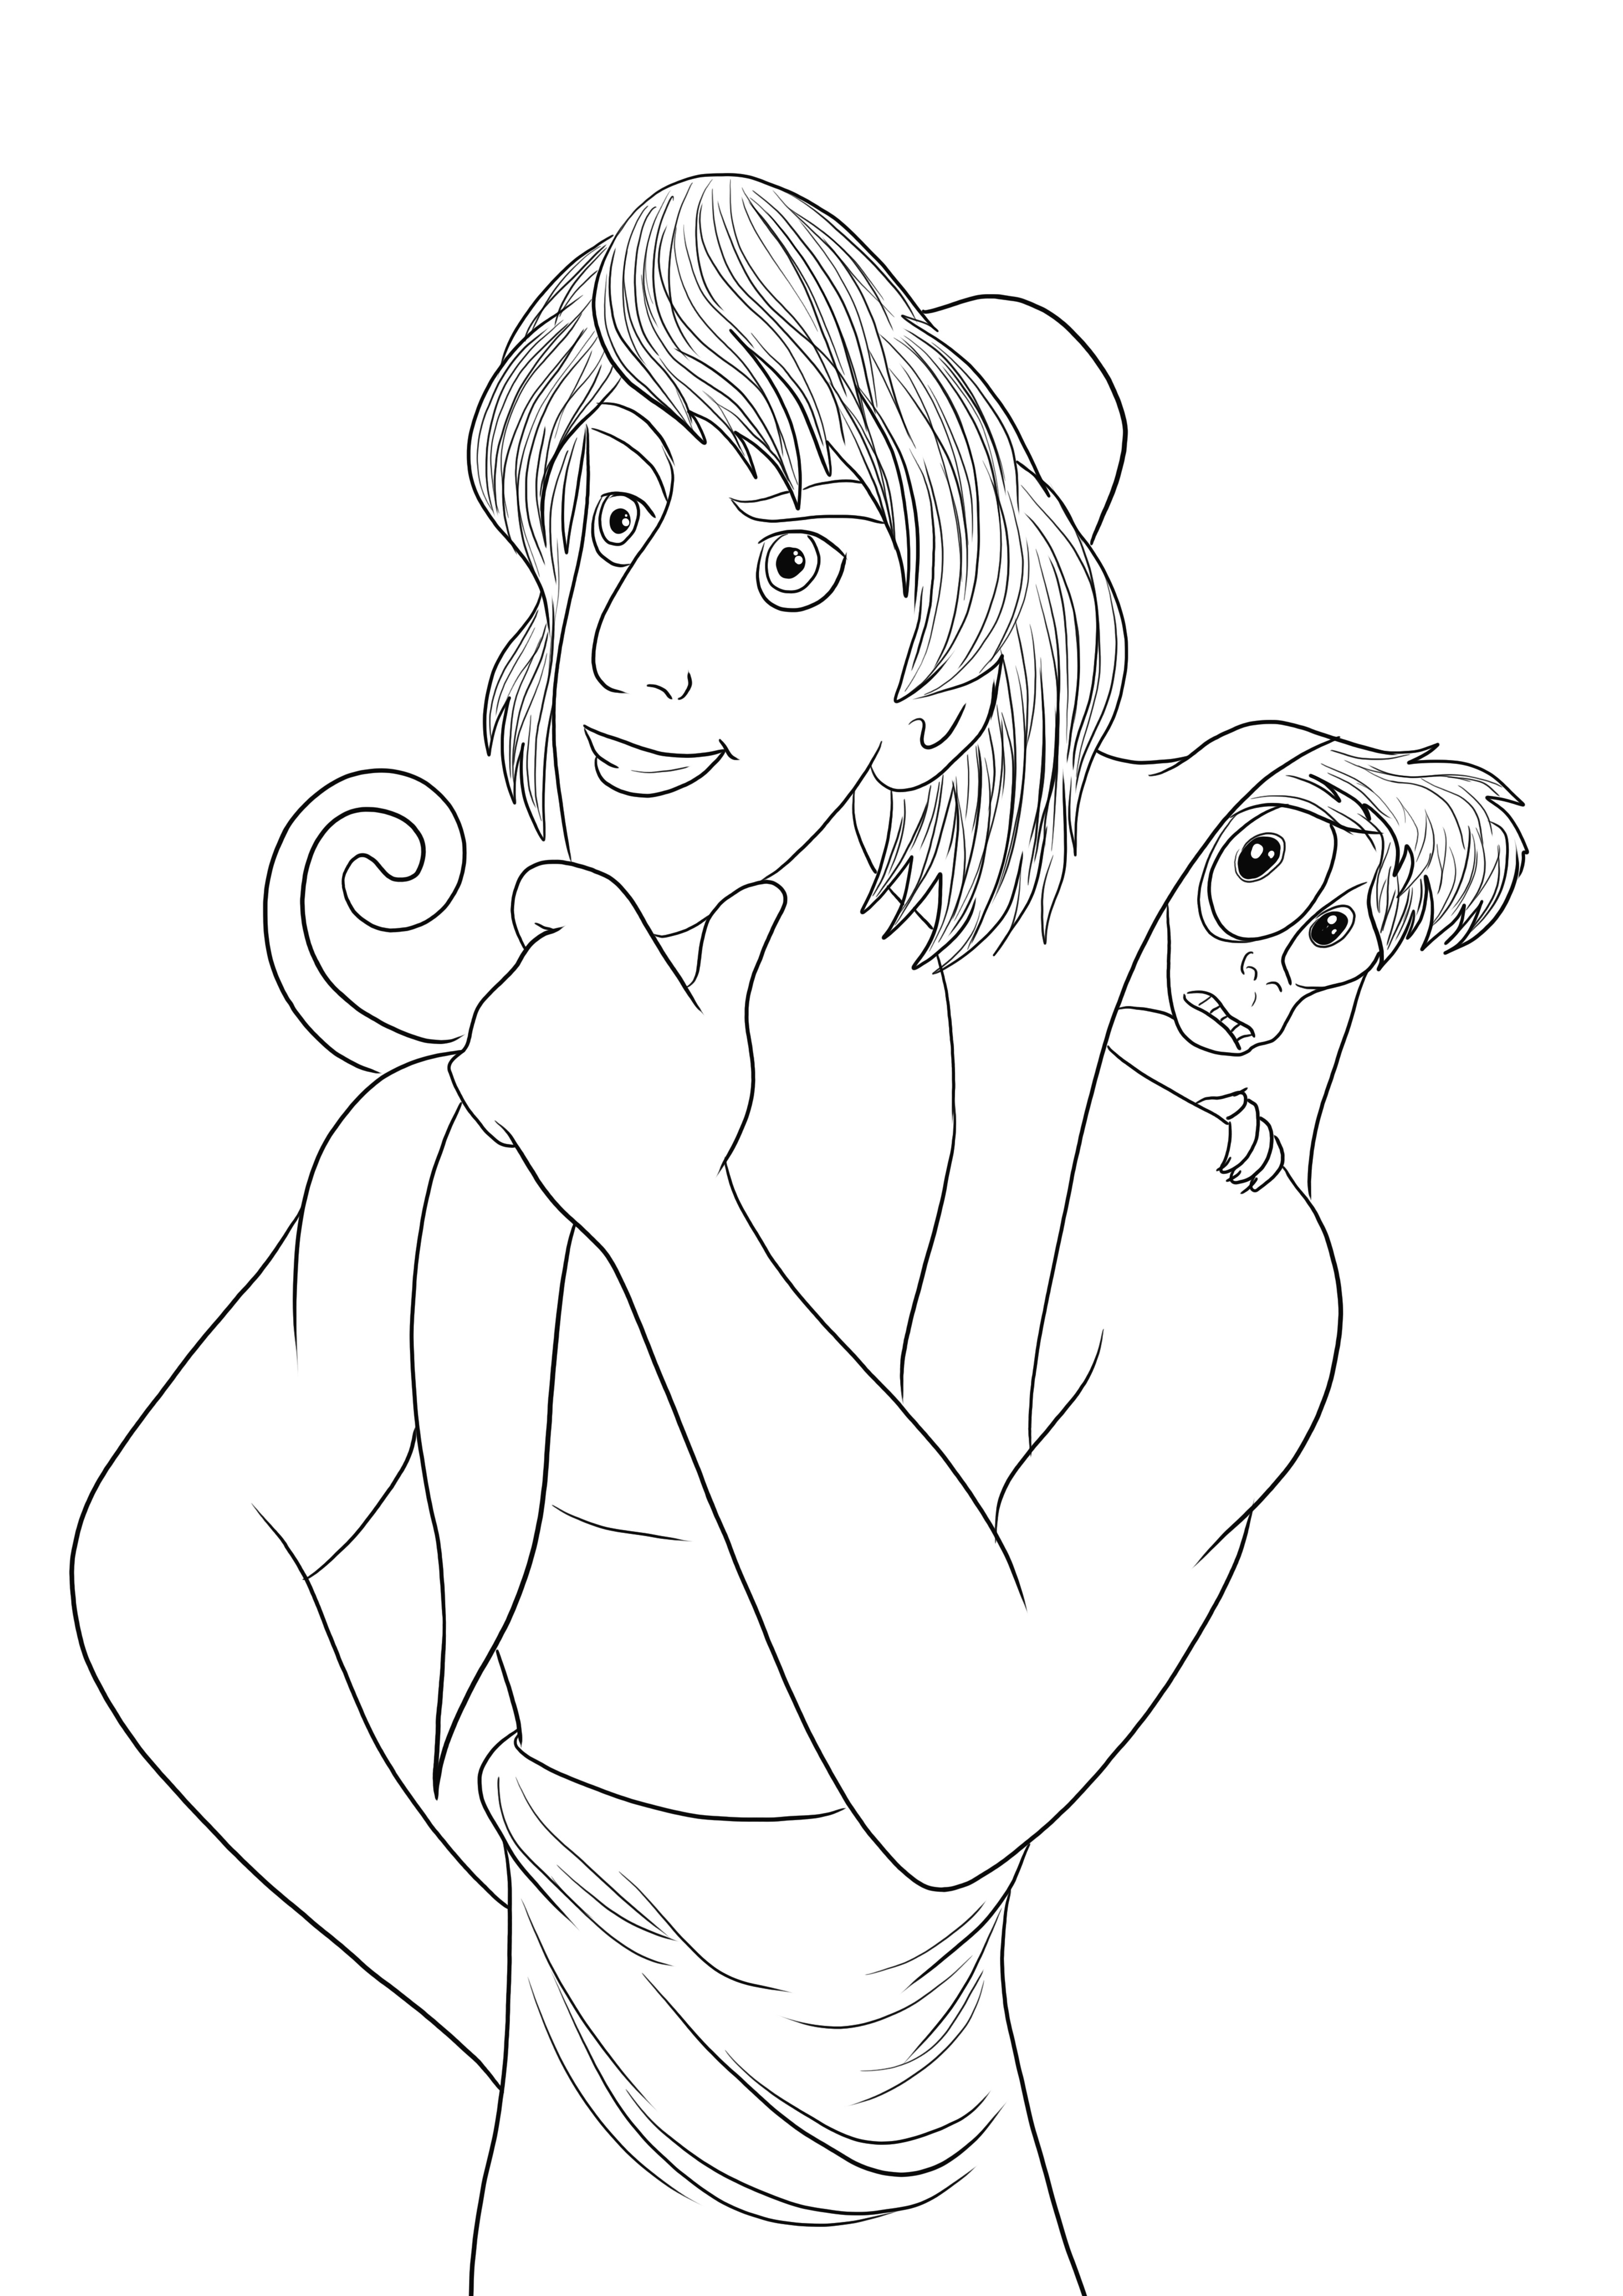 Aladdin and his friend Abu want someone to color them for free. Our kids' coloring pages, free of Aladdin and Abu Cartoon characters, will help your toddlers to learn many things about the world. The easy coloring of Aladdin, Abu, and Jasmine will enterta